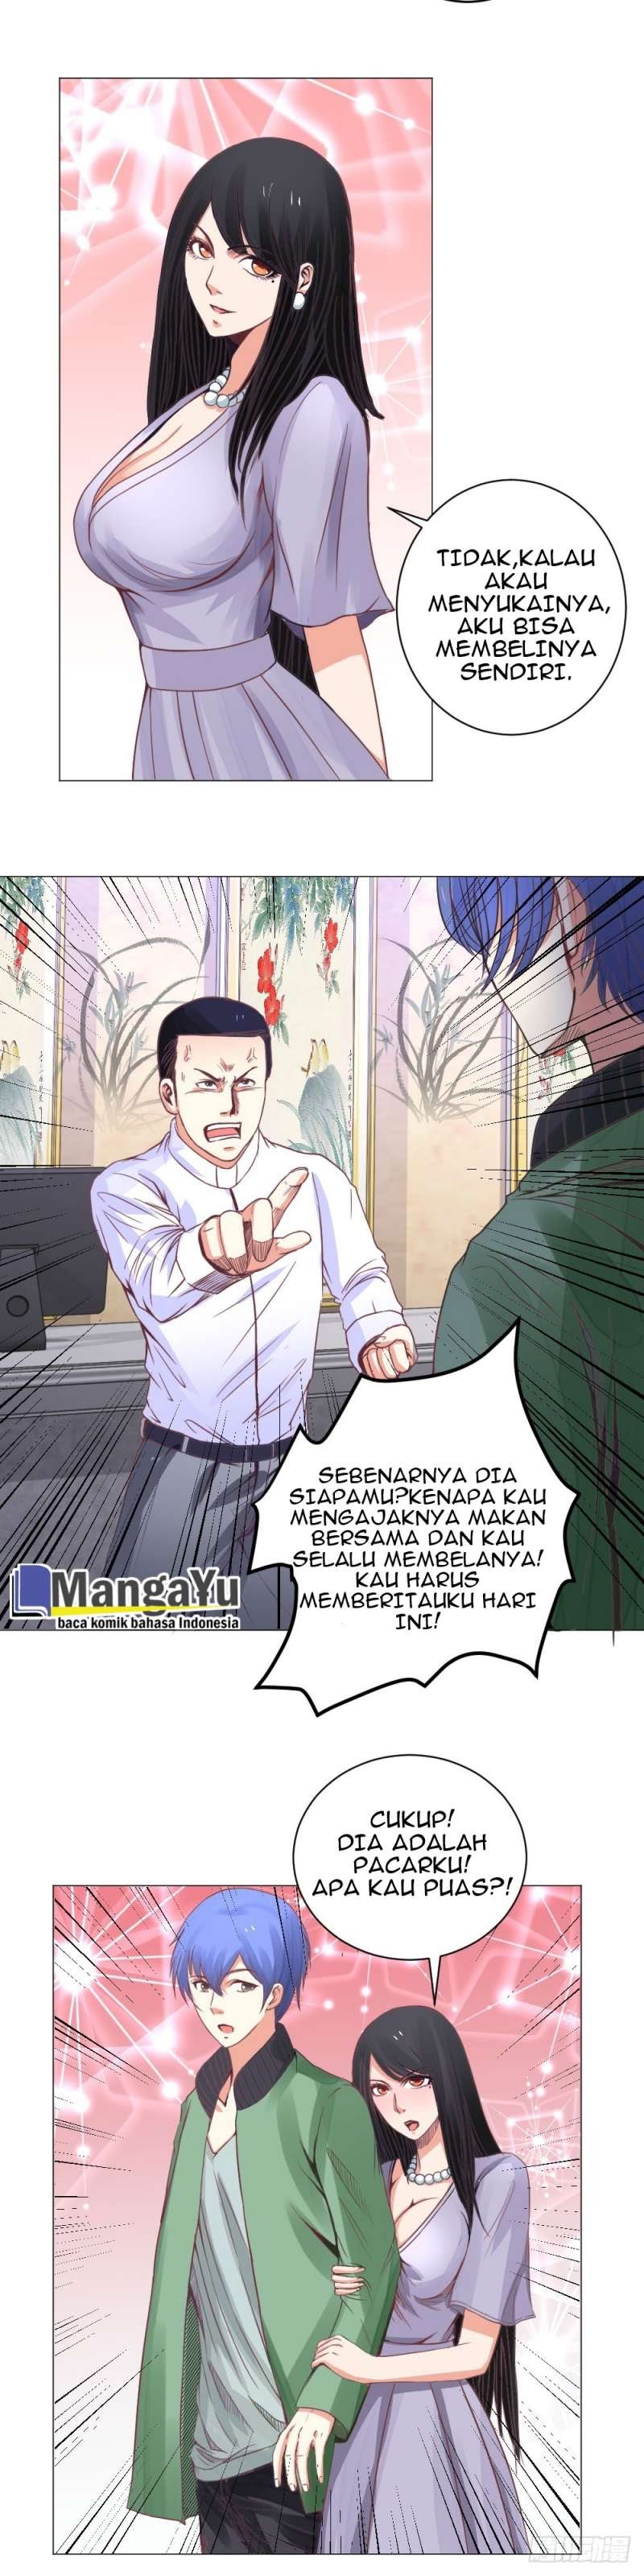 Perspective Medical Saint Chapter 10 13